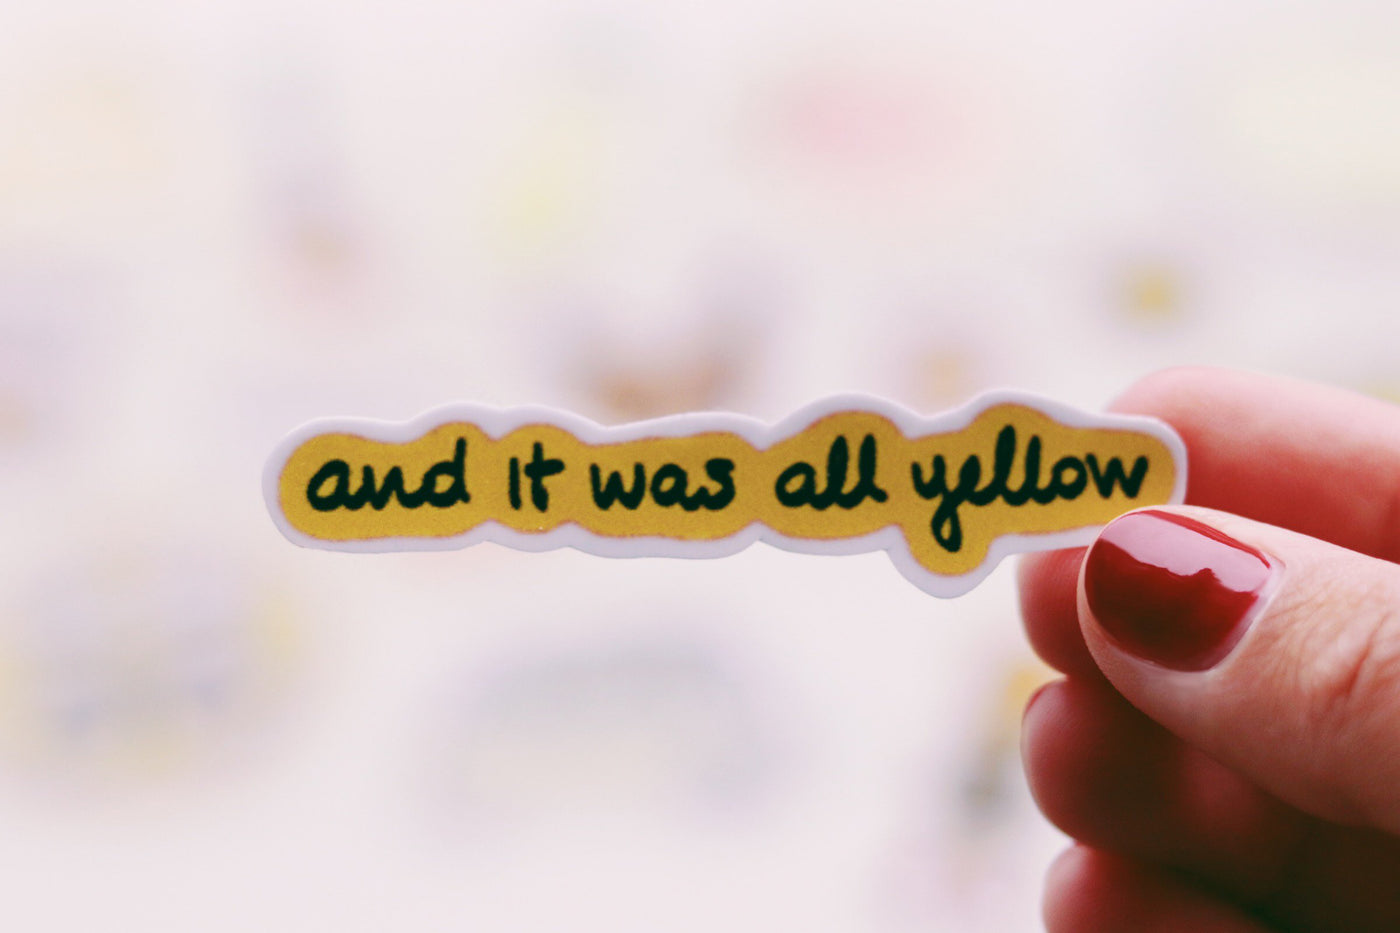 And it was all yellow